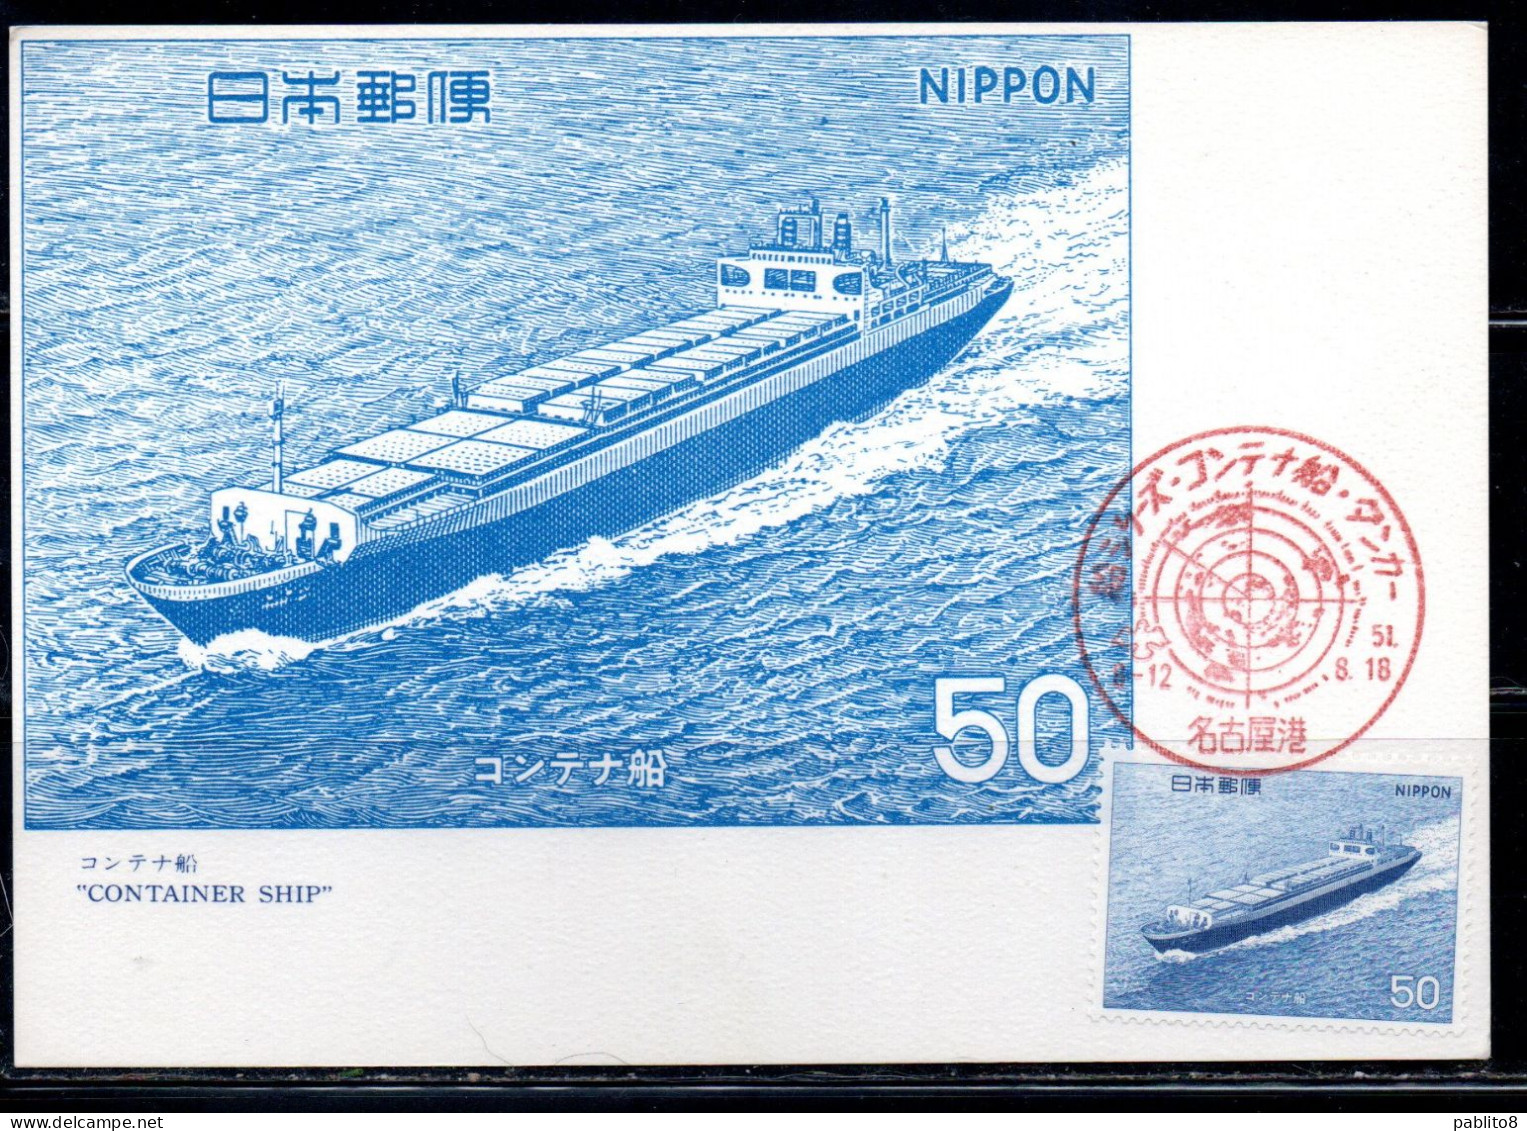 JAPAN GIAPPONE 1975 1976 HISTORIC SHIPS ISSUE CONTAINER SHIP 50y MAXI MAXIMUM CARD - Cartes-maximum